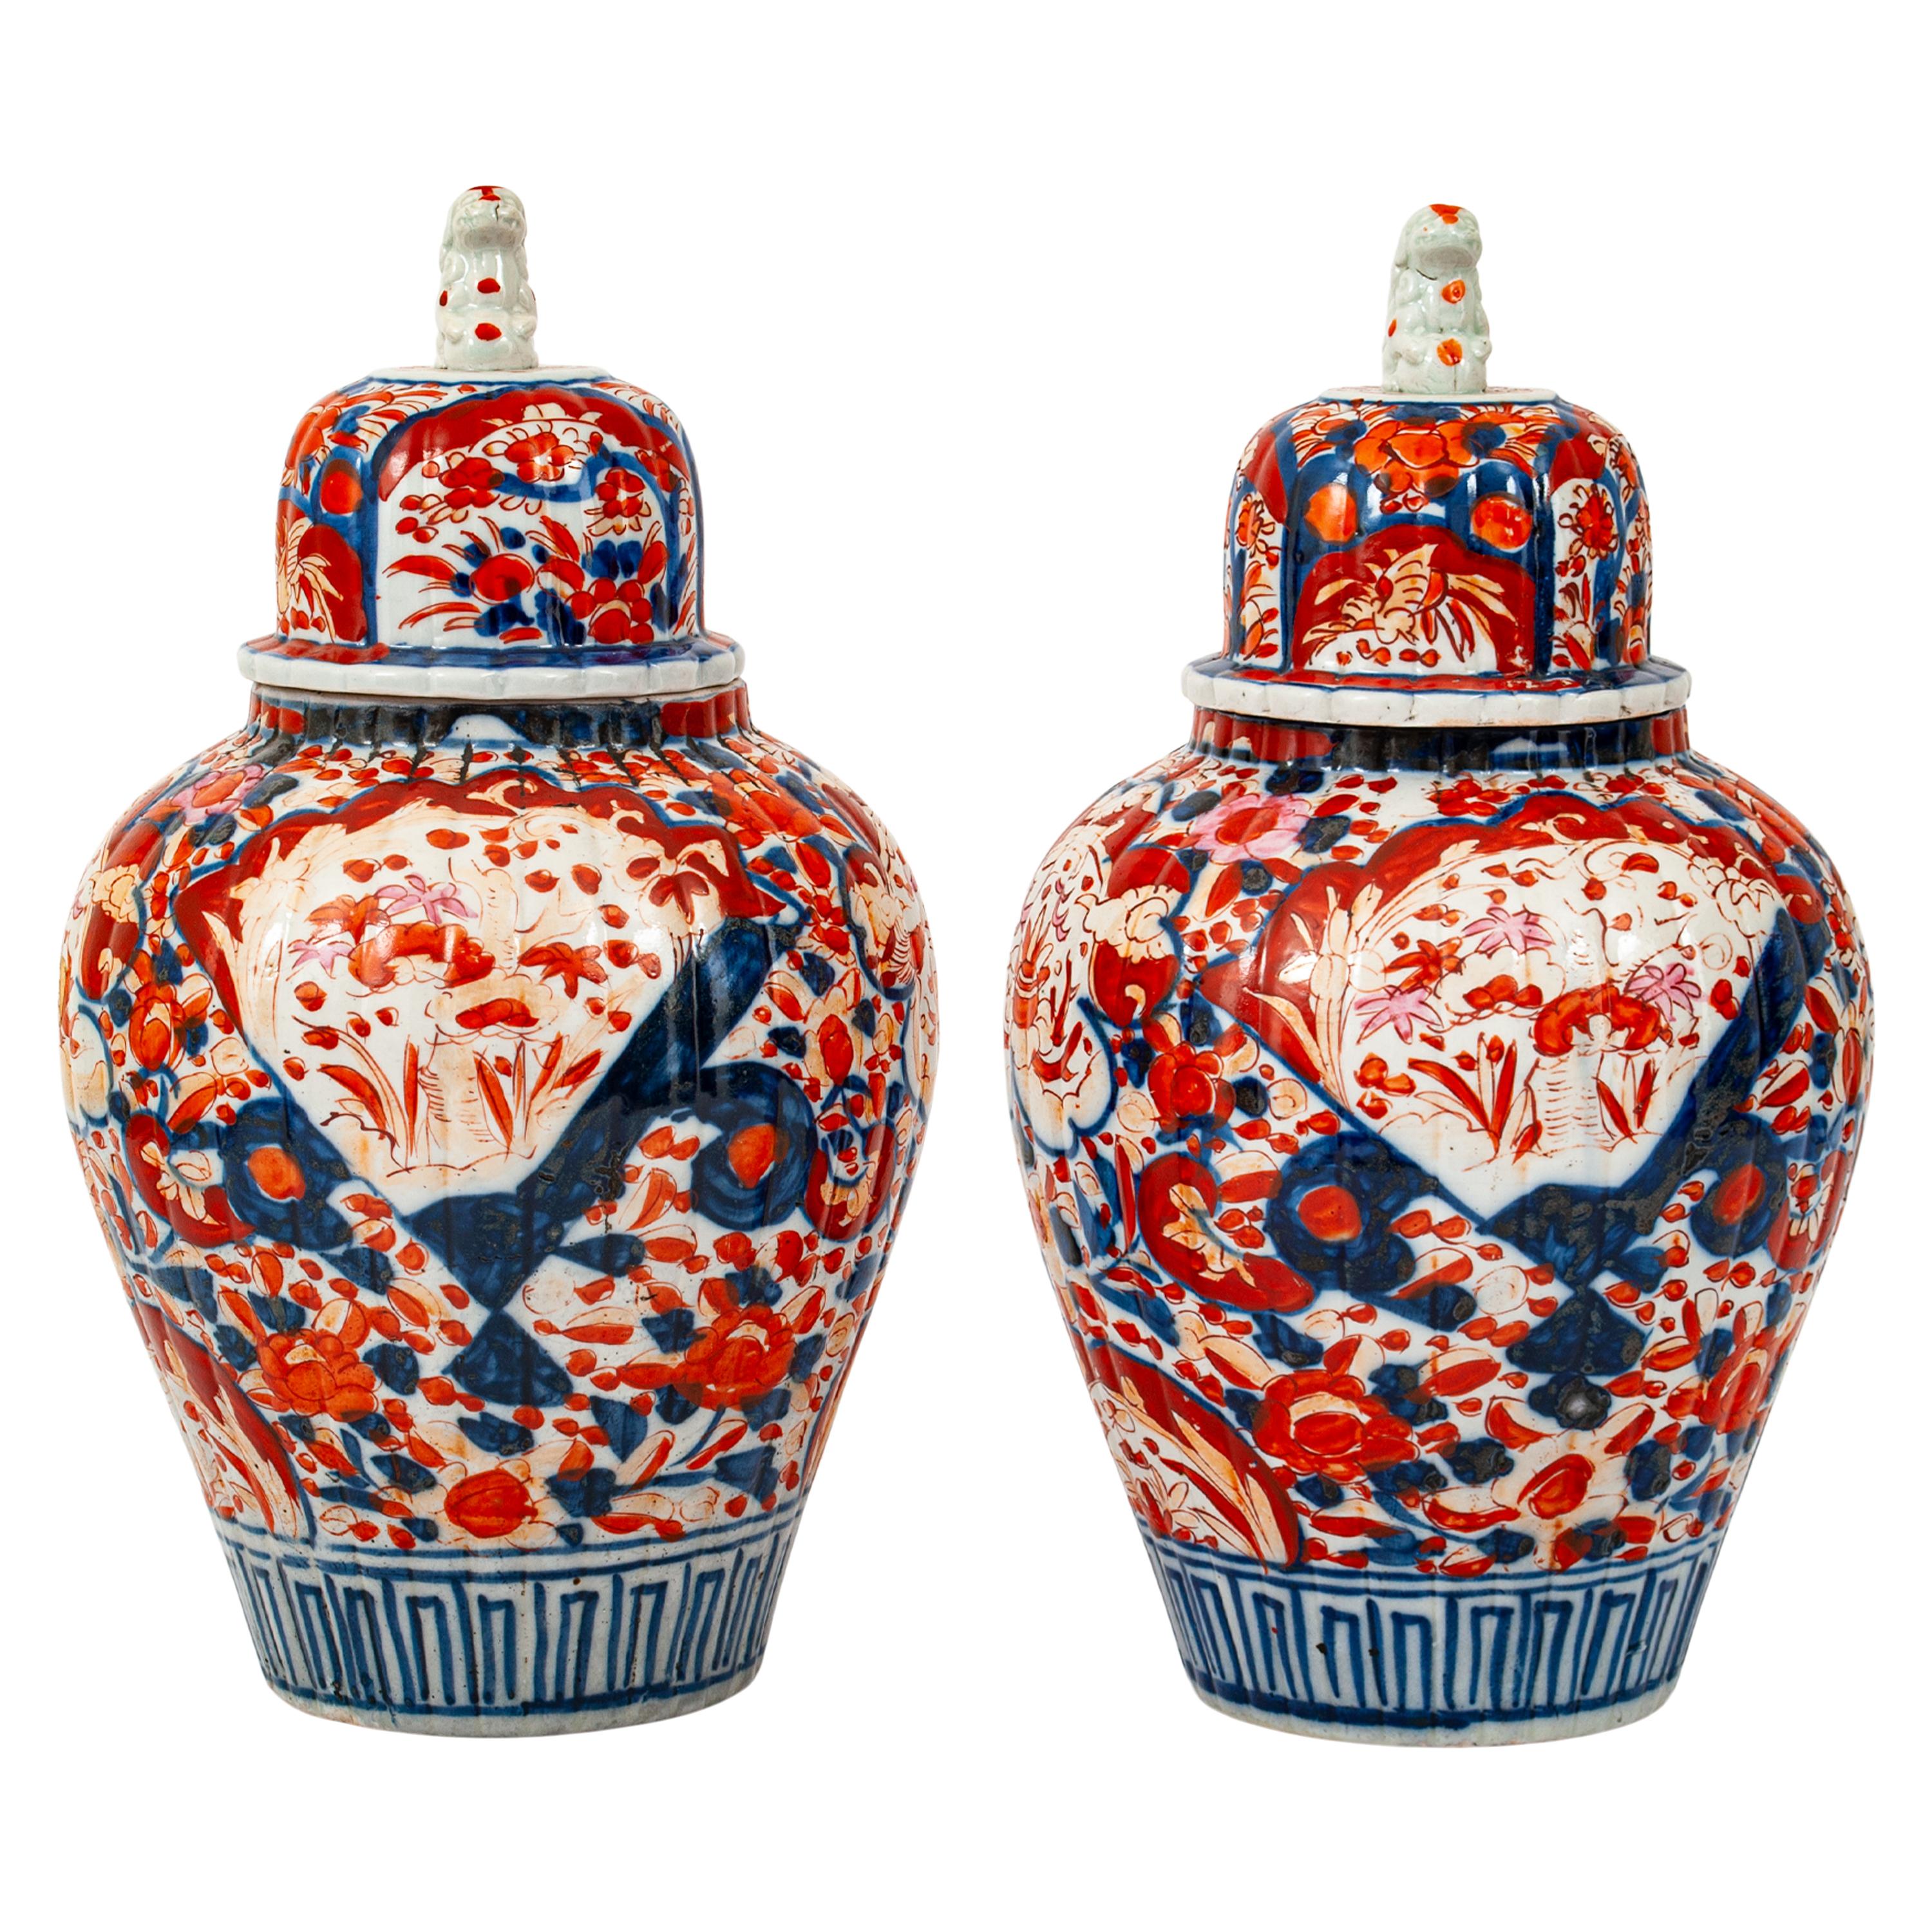 Pair Large Antique Japanese Meiji Period Porcelain Imari Lidded Jars Urns, 1880 In Good Condition For Sale In Portland, OR